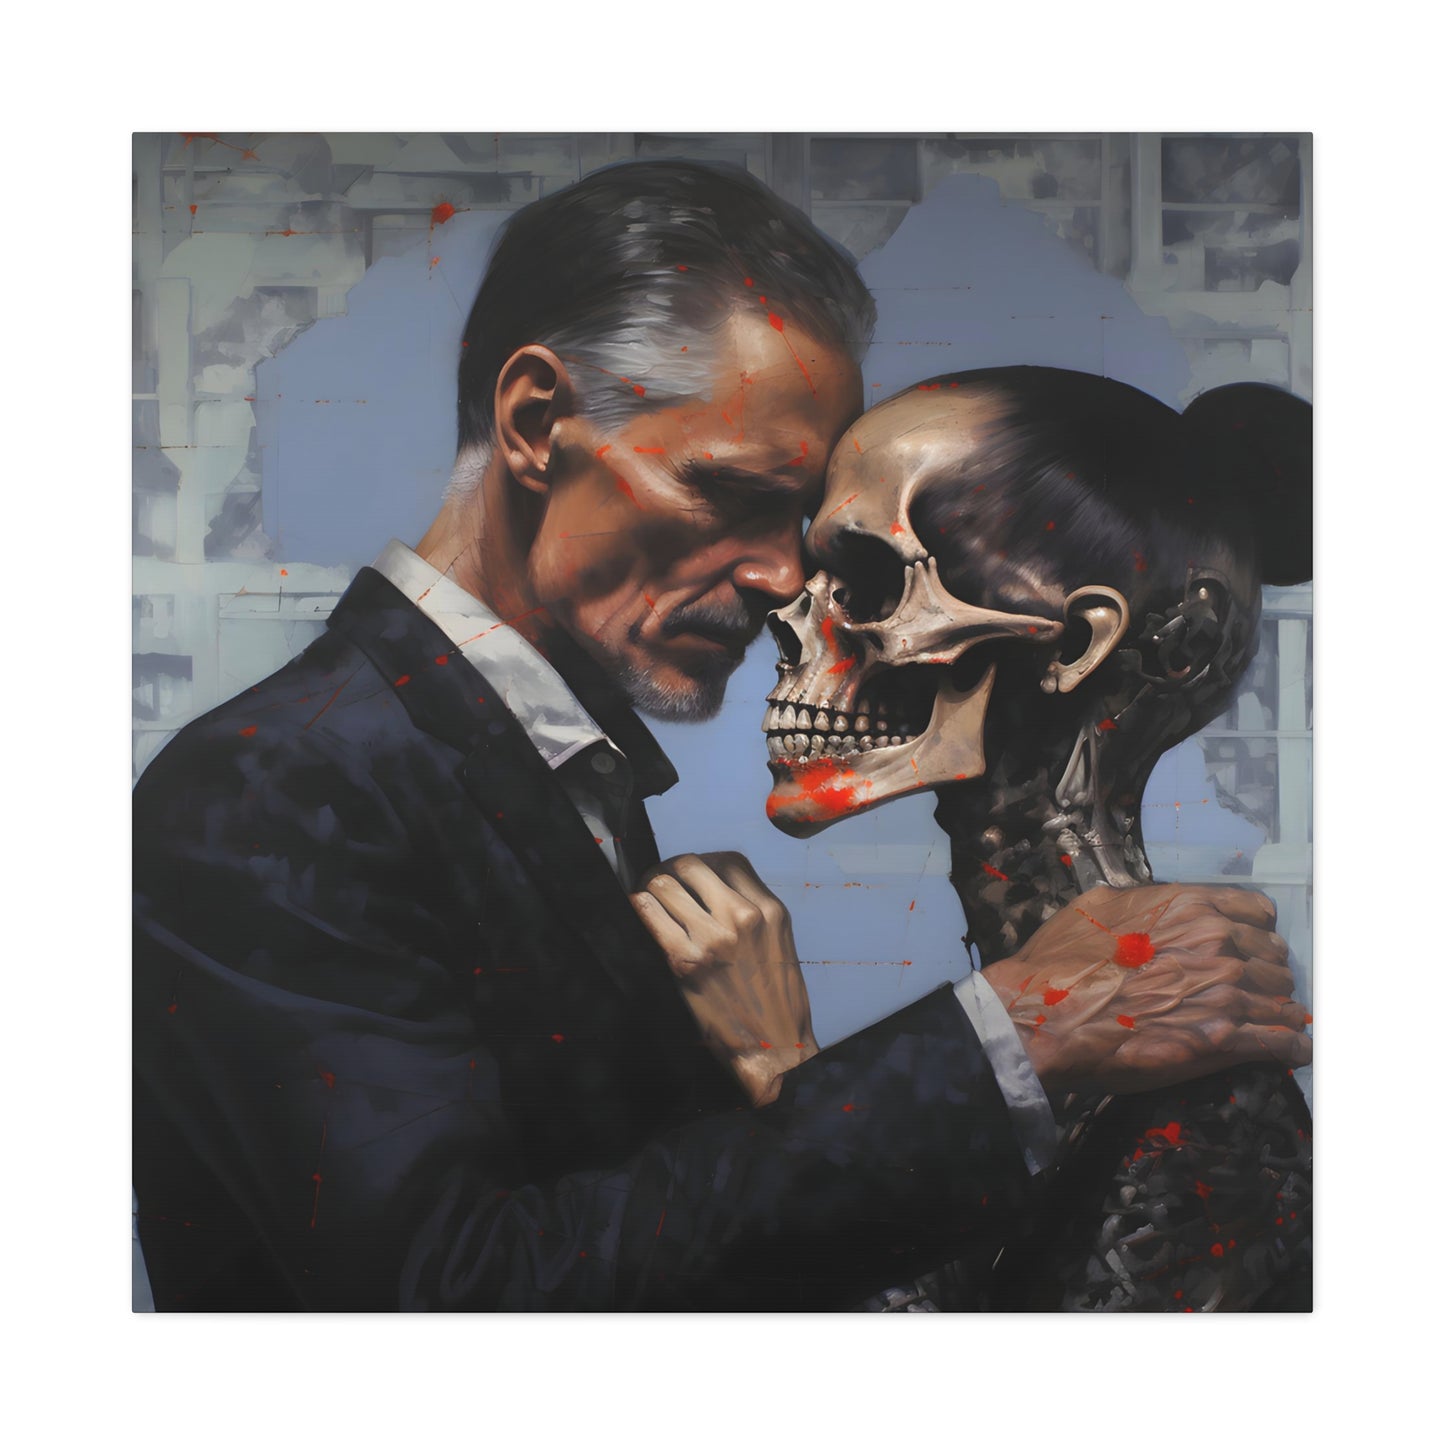 image 4 Embrace of Mortality', a hyperrealist painting depicting the haunting juxtaposition of love and death, offering a visceral reminder of human fragility, inspired by vanitas art traditions with a modern twist.